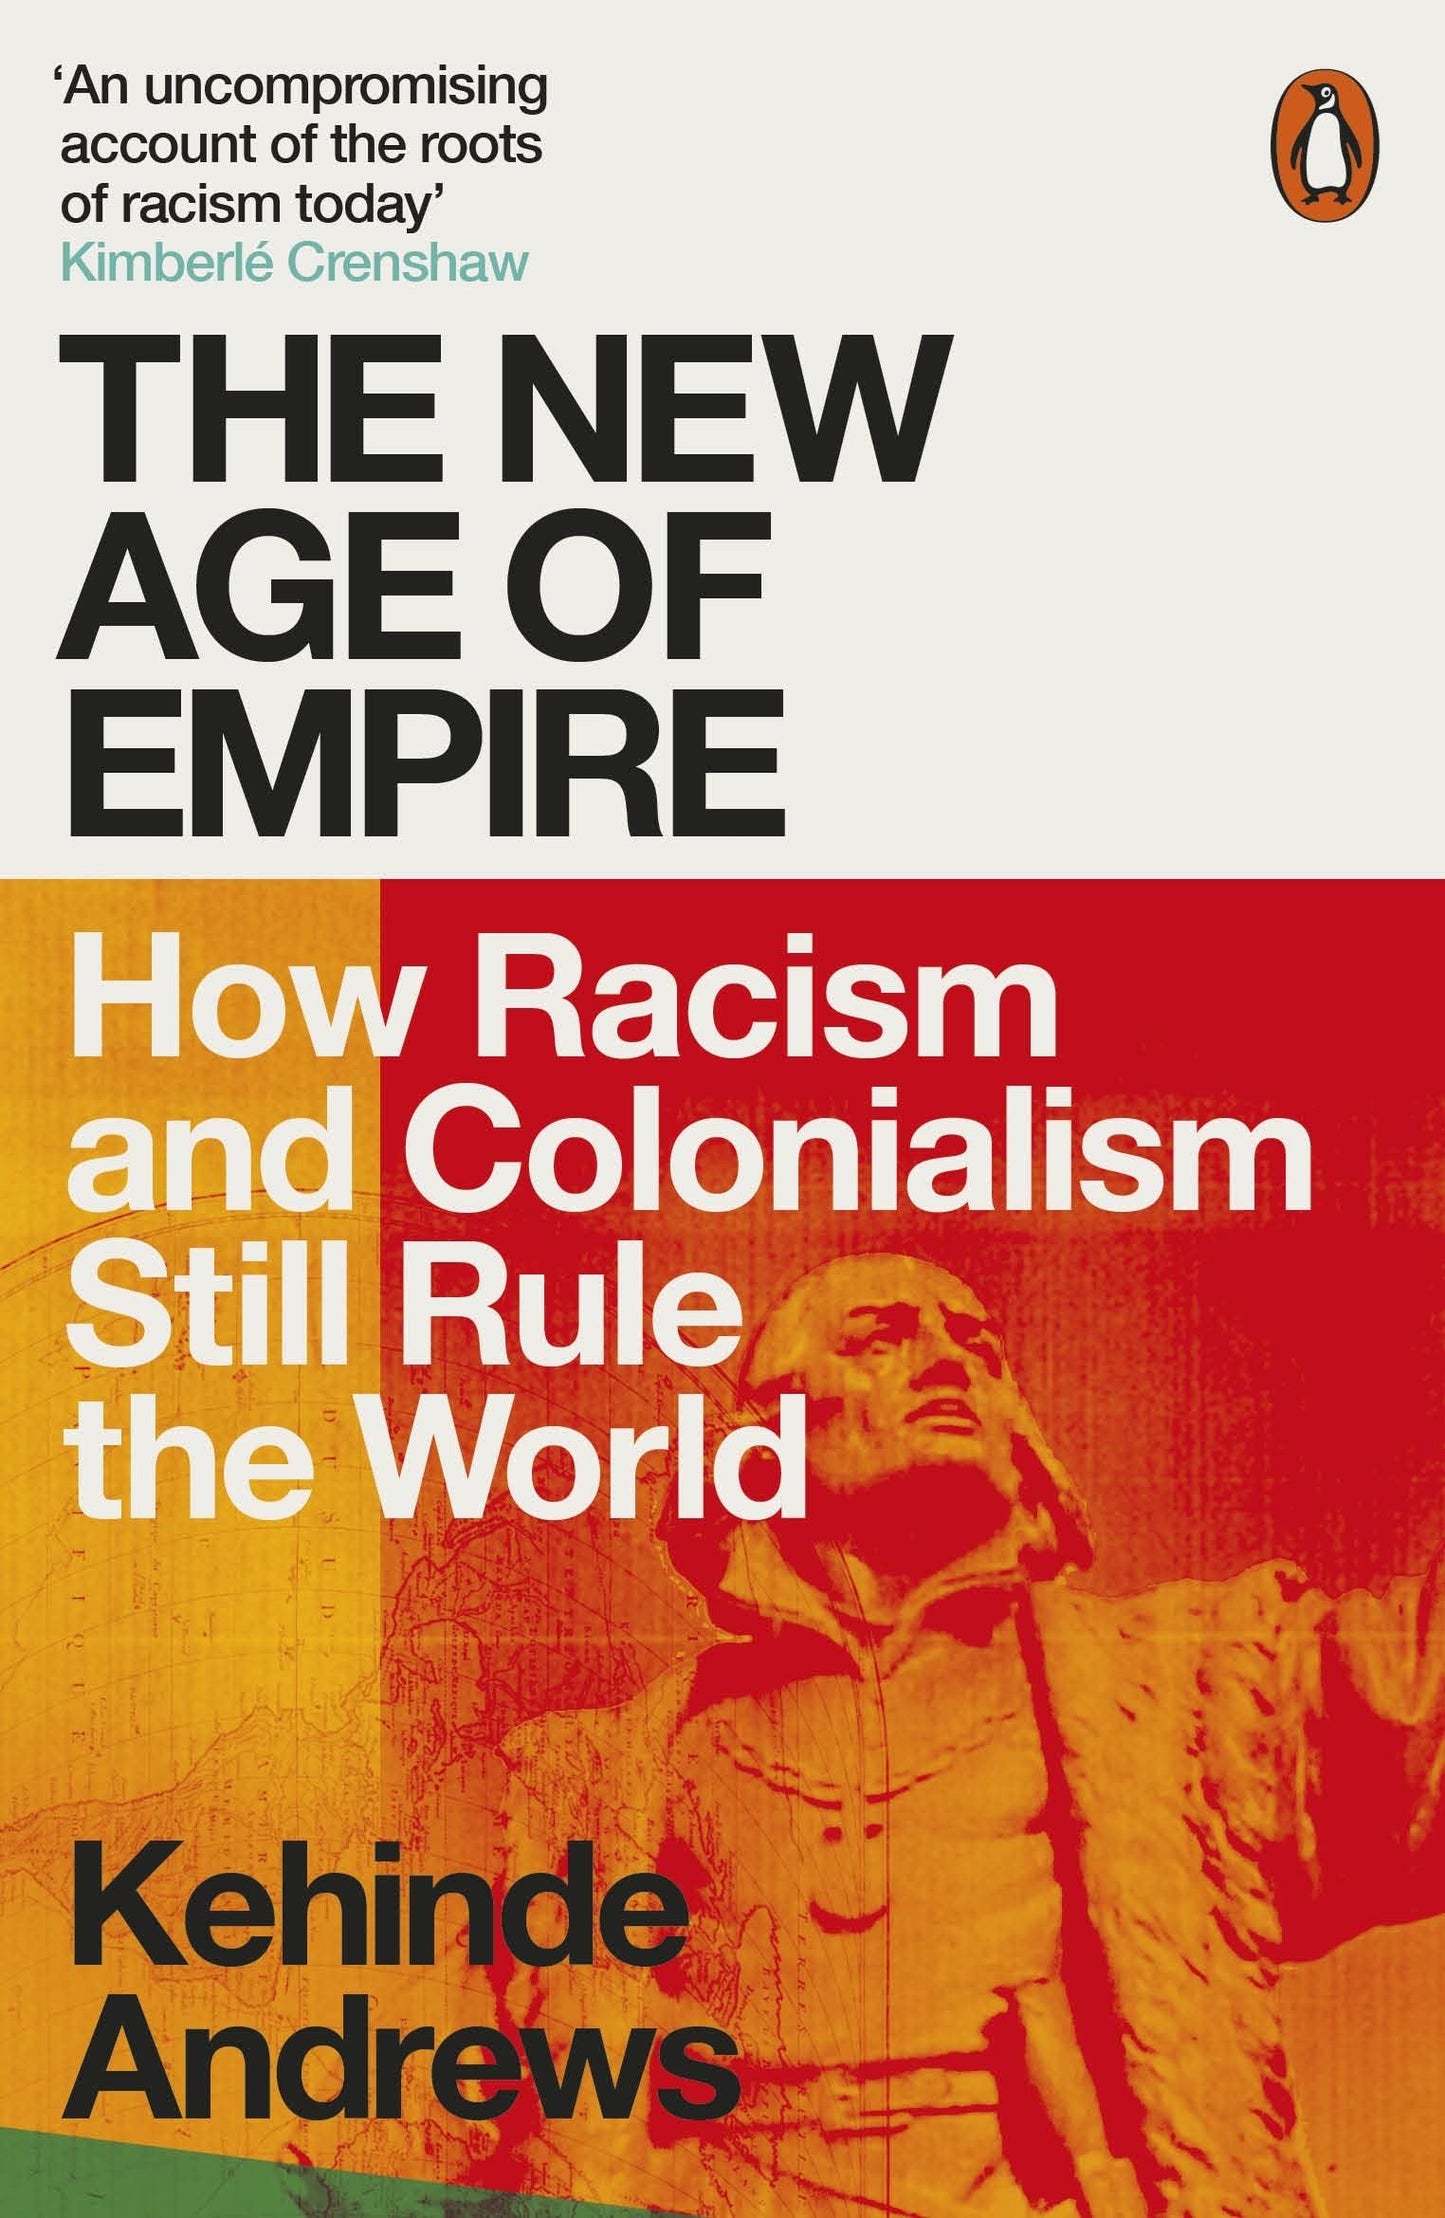 The New Age of Empire - How Racism and Colonialism Still Rule The World